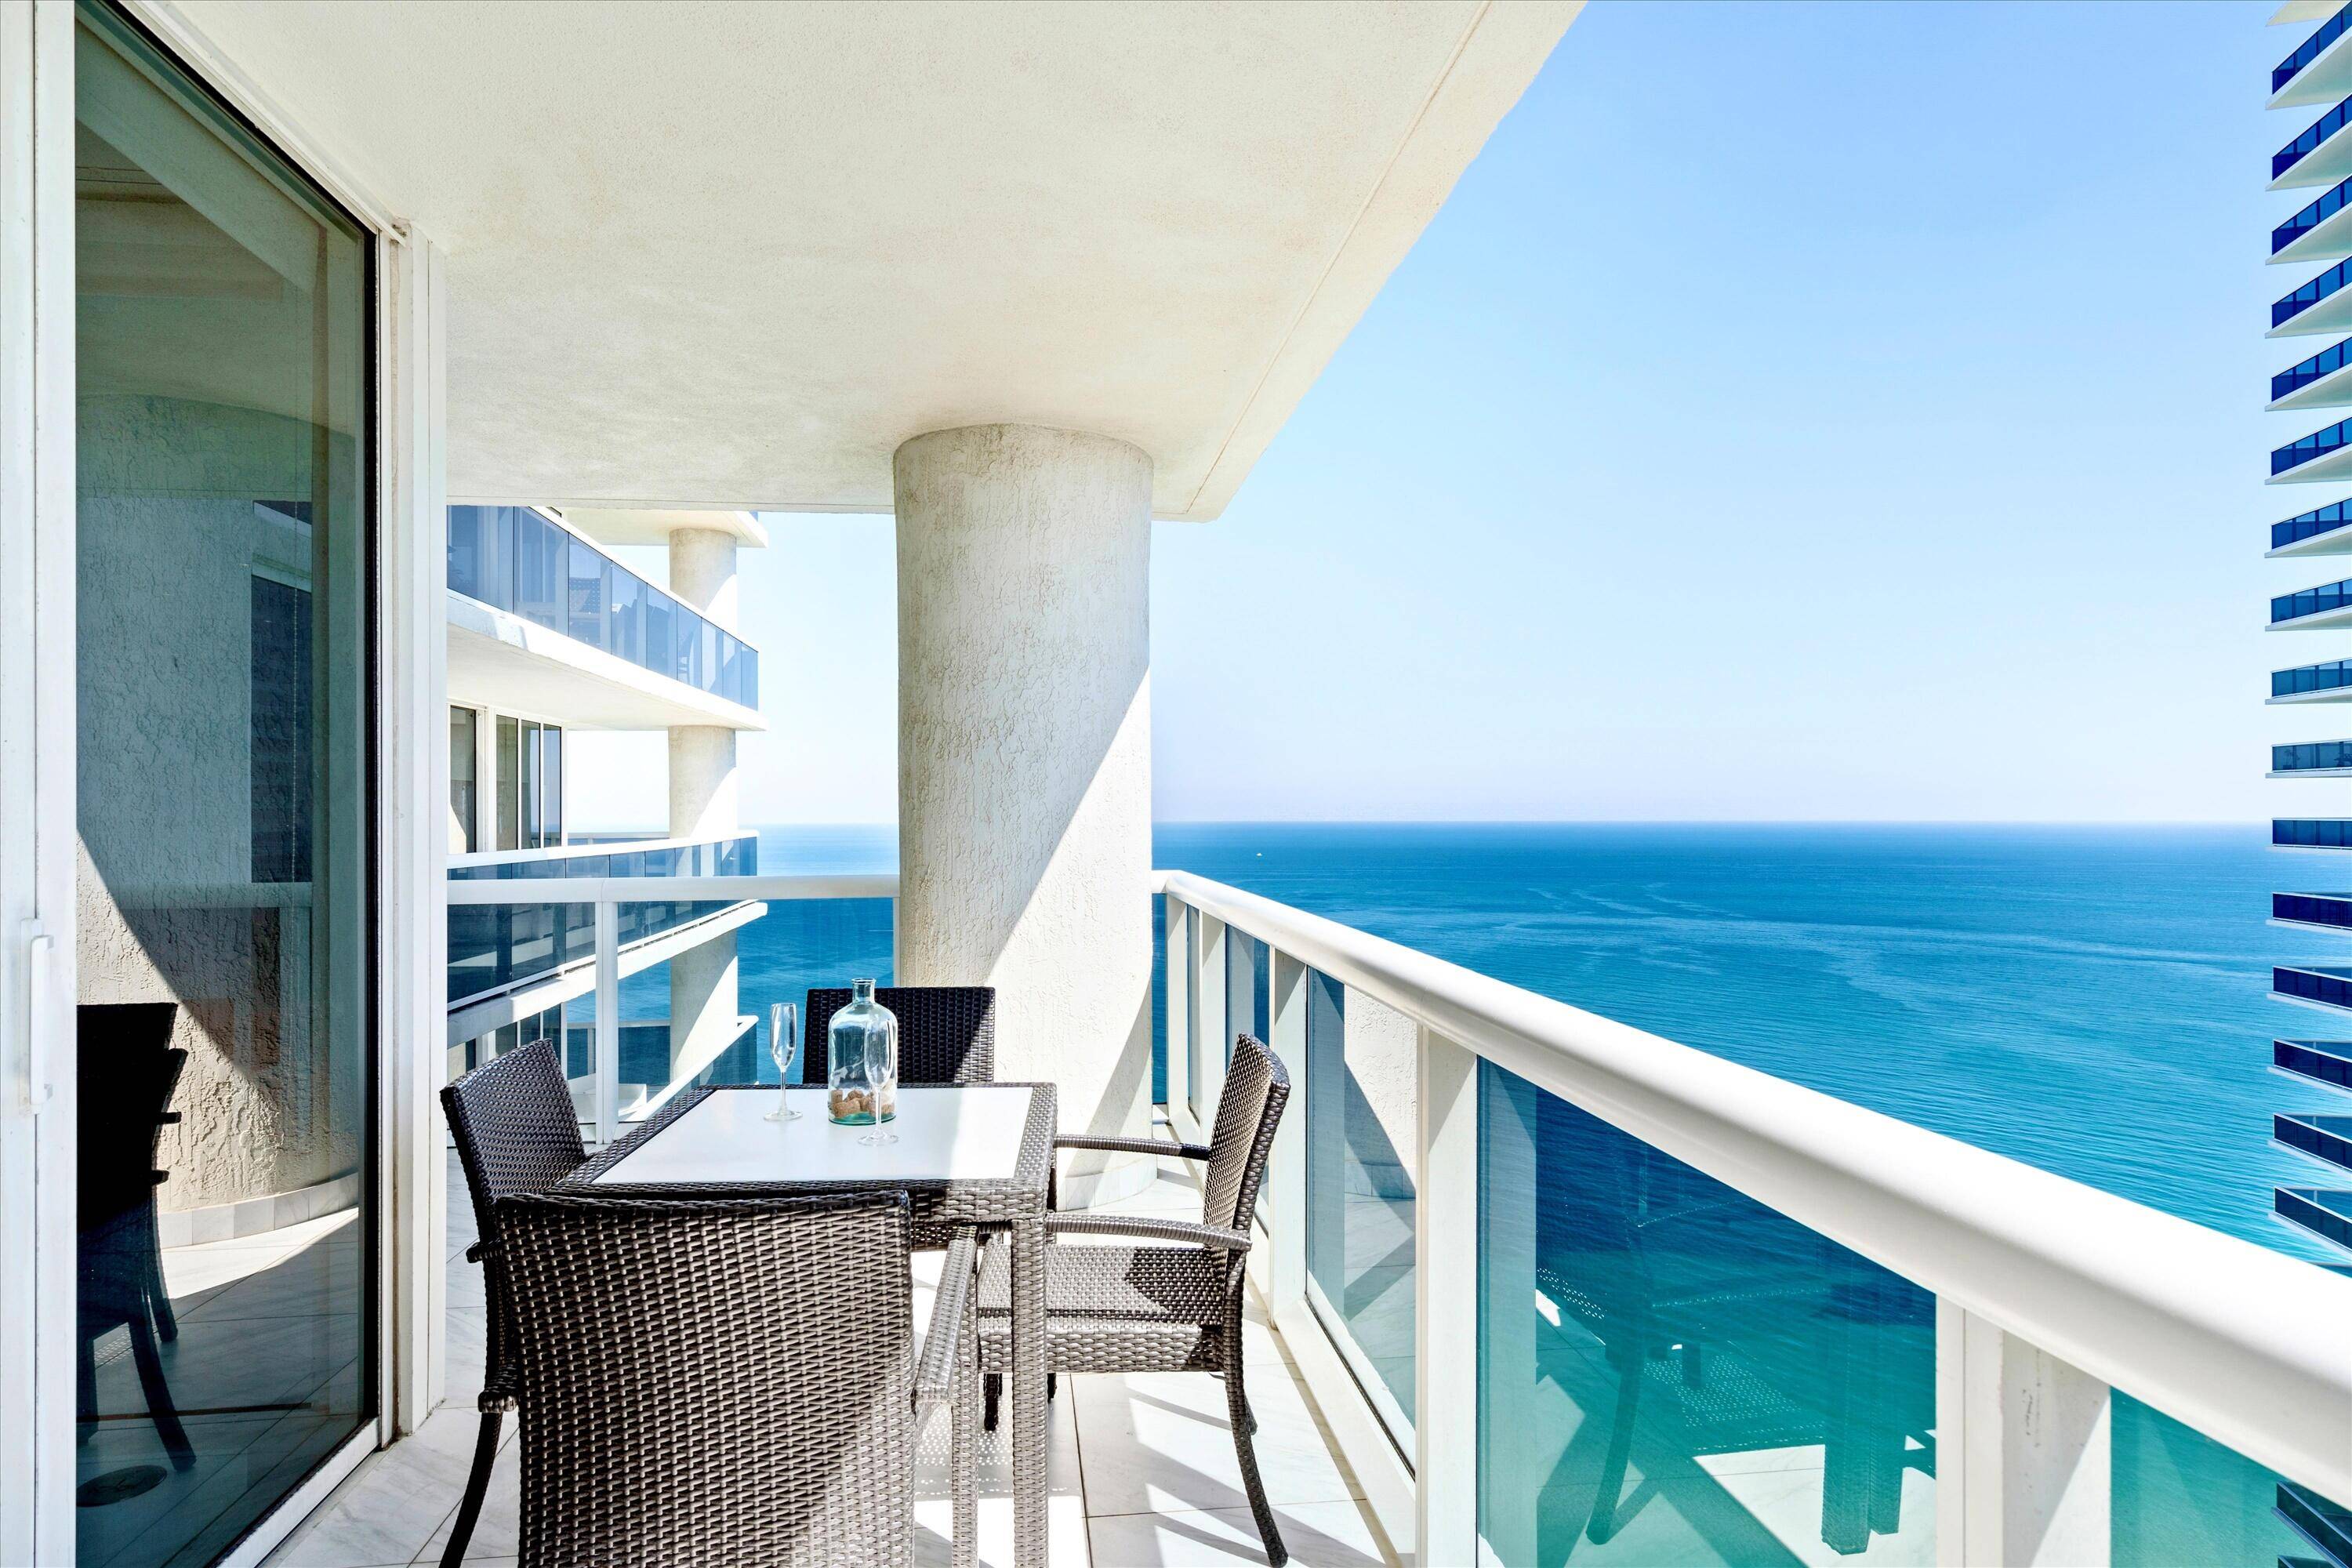 Welcome to Lower Penthouse 5, a gorgeous and updated corner unit where you are greeted with exceptional views of the ocean, city and intracoastal.